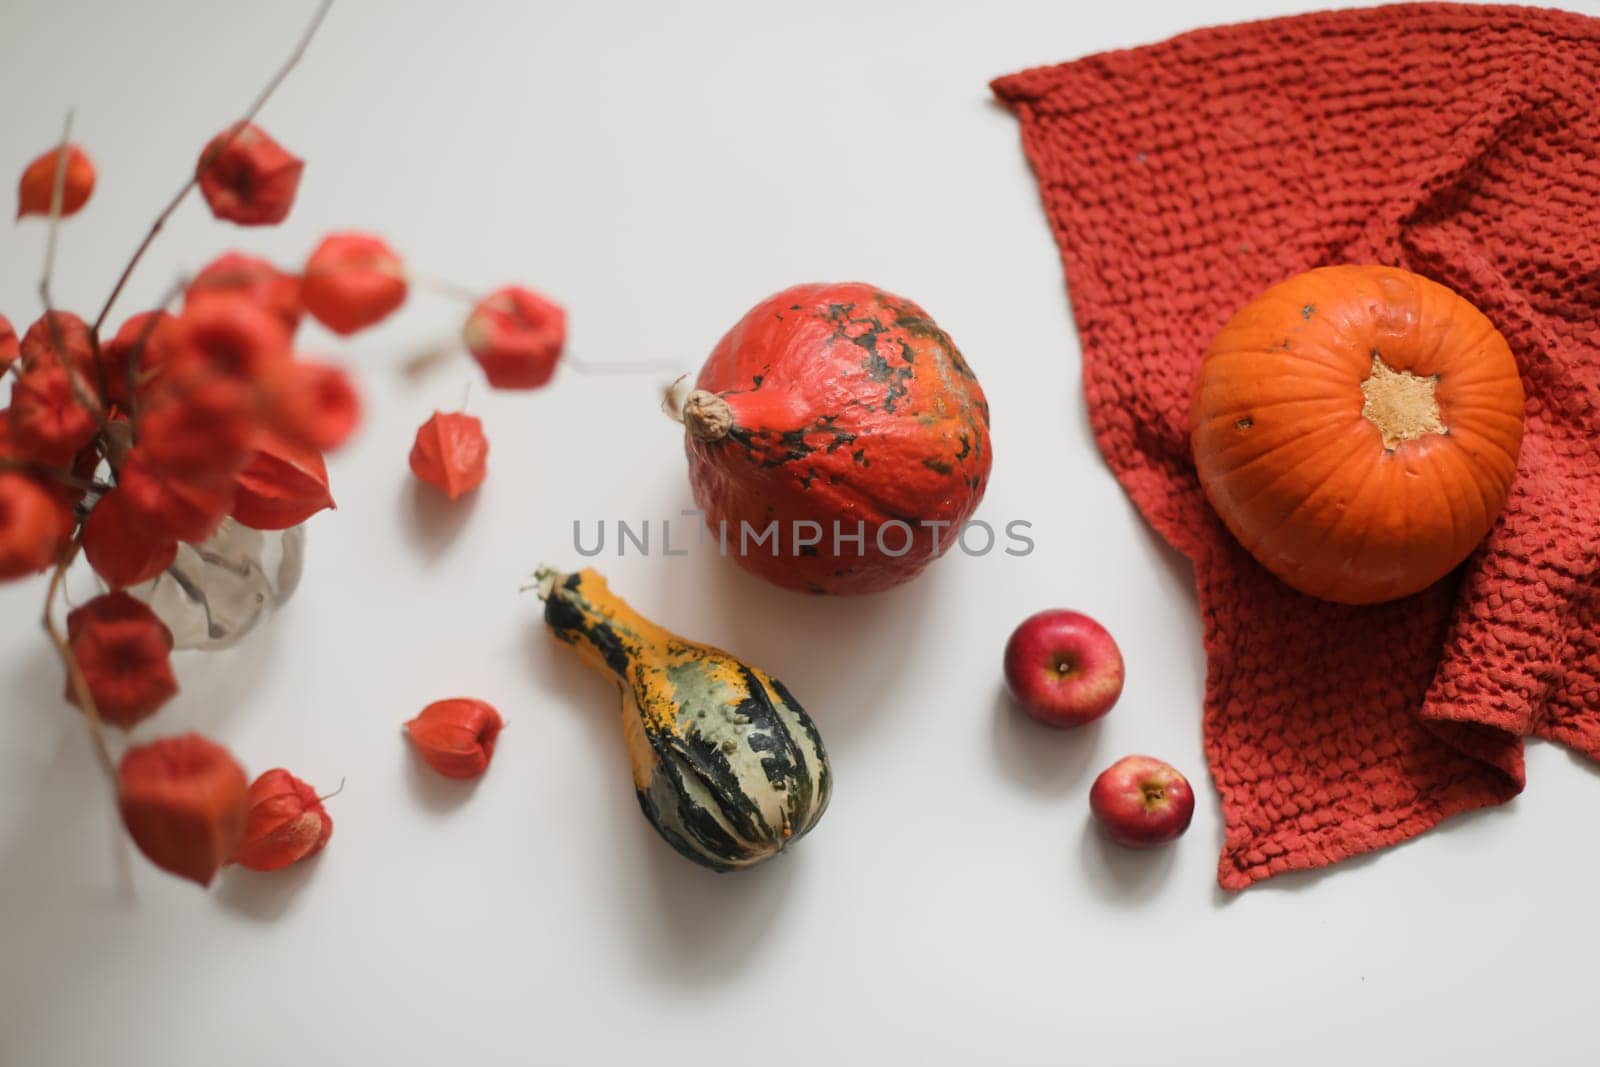 Colorful varieties of pumpkins and squashes. Autumn harvest. Color gradient background.